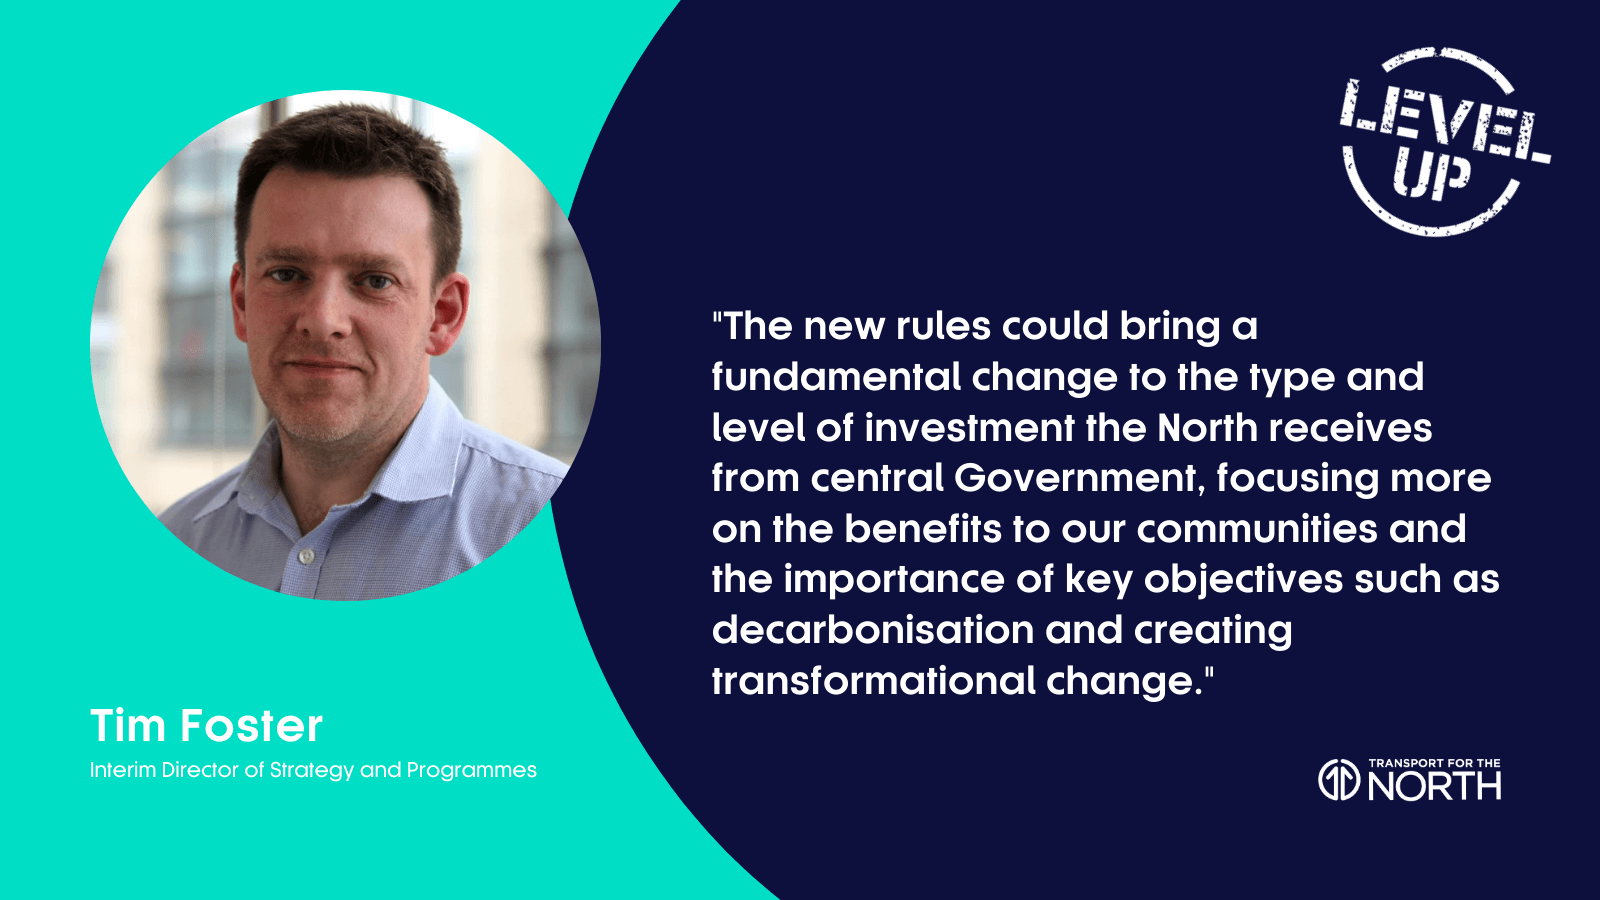 Tim Foster, Interim Director of Strategy and Programmes at Transport for the North